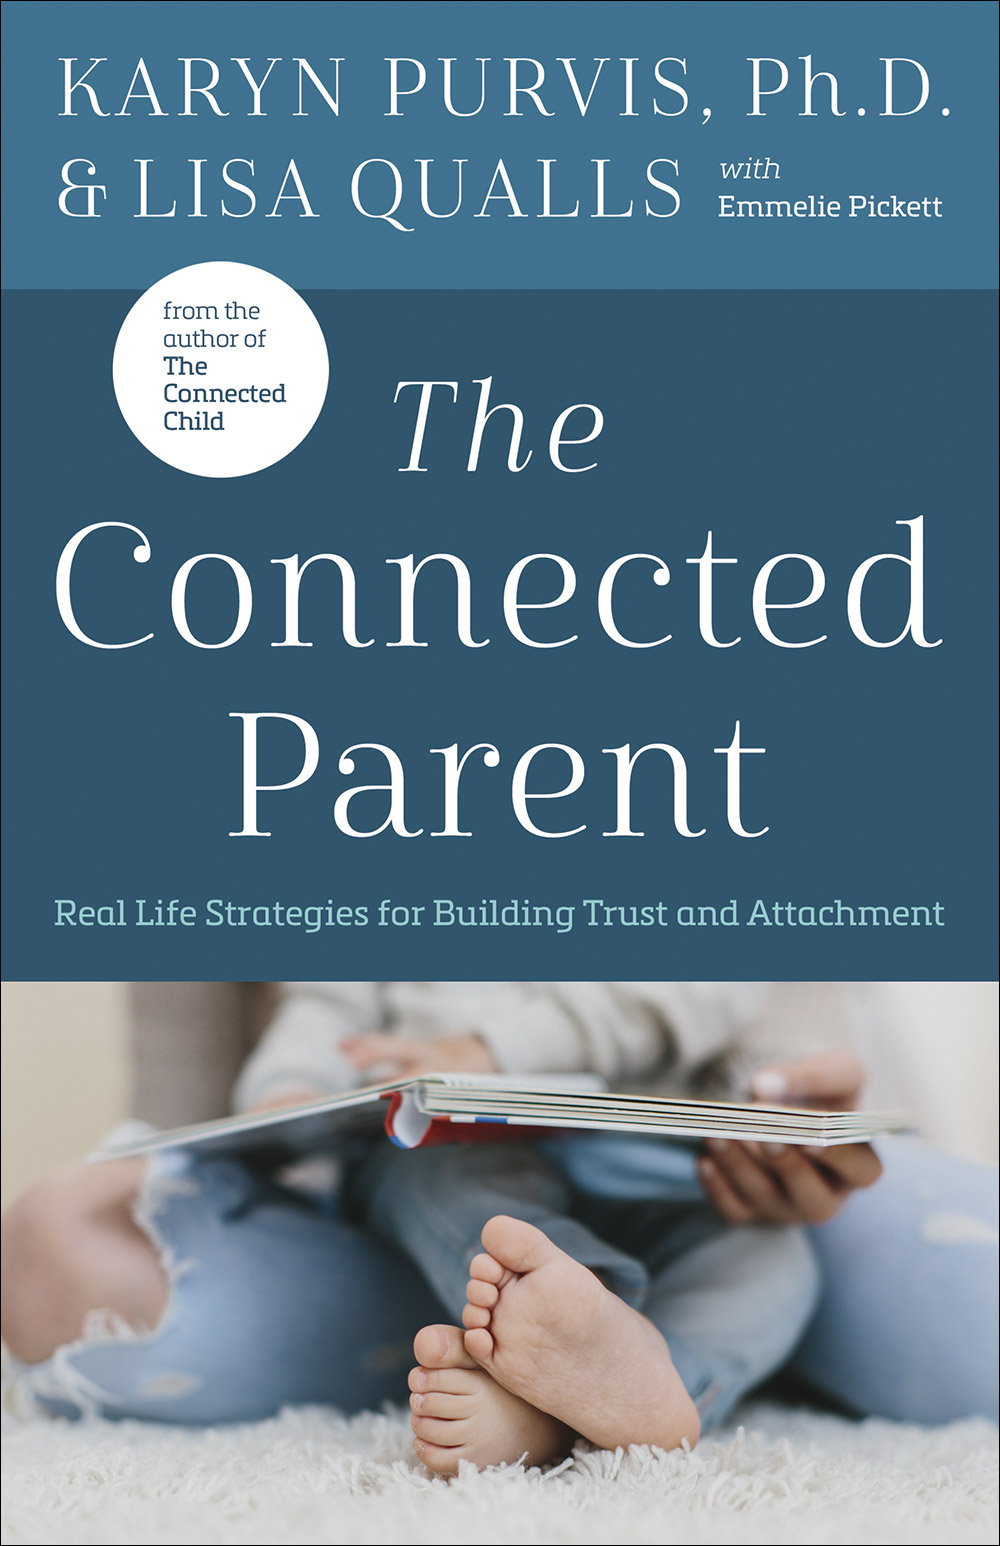 Connected Parent by Lisa Qualls;Karyn Purvis | Free Delivery at Eden